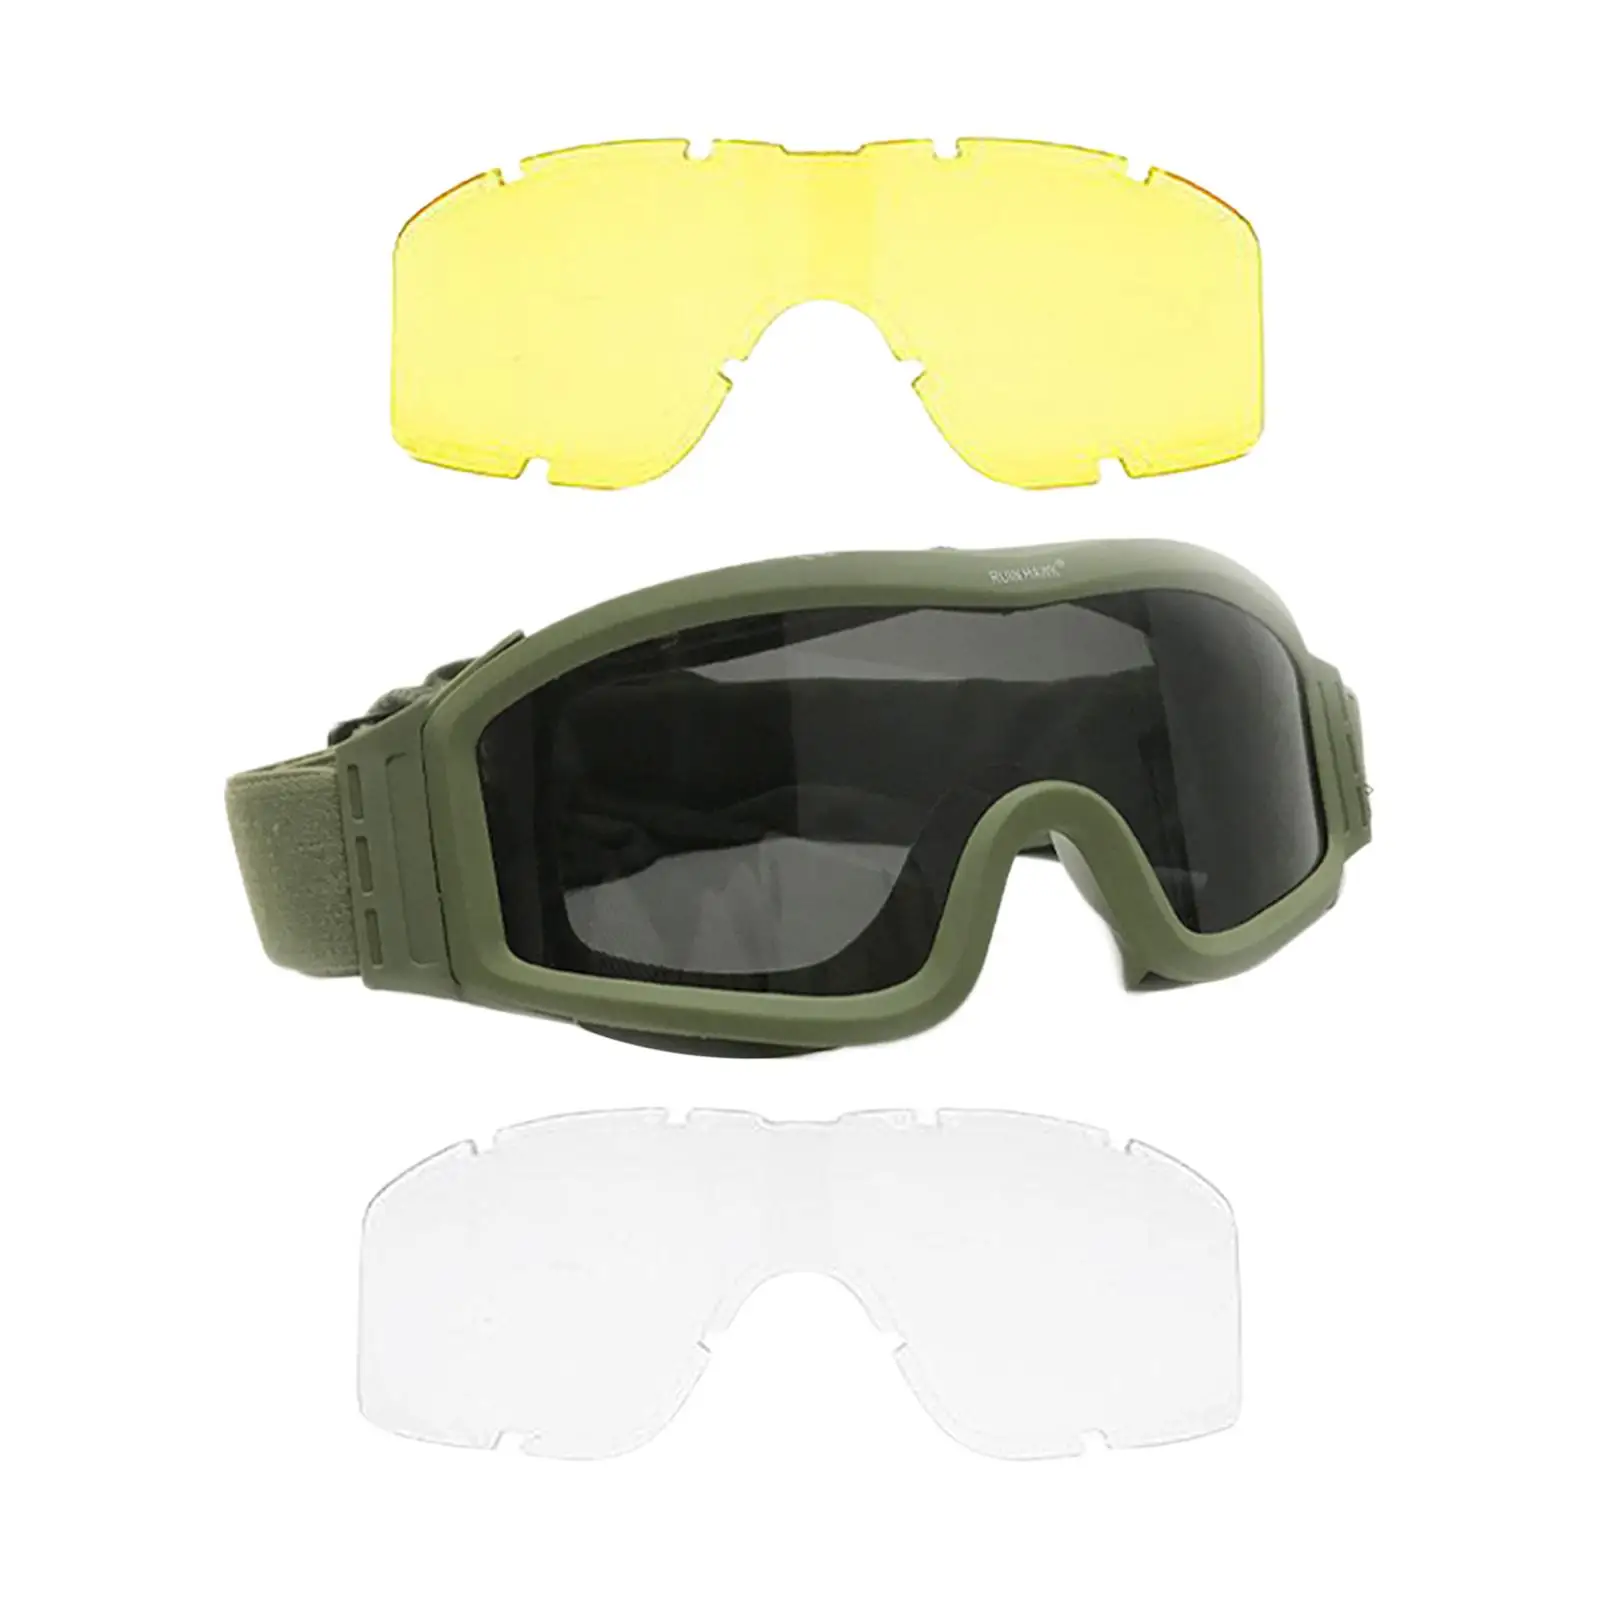 Goggles Glasses Interchangeable Lens Anti UV for Sport Combat Shooting